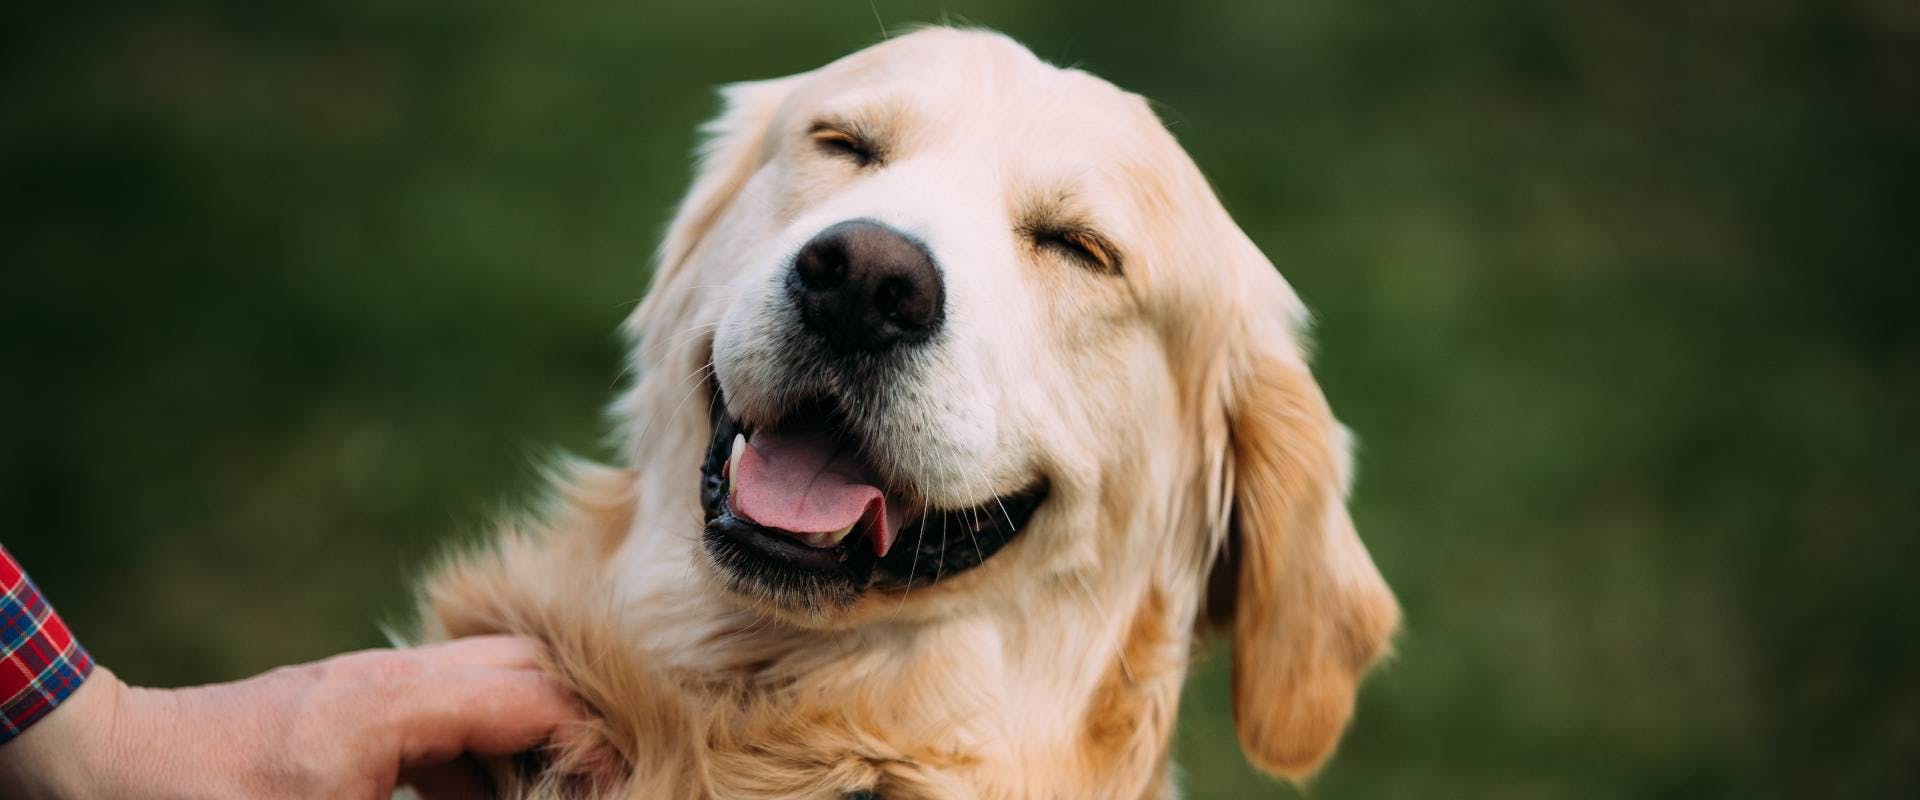 A dog smiling.